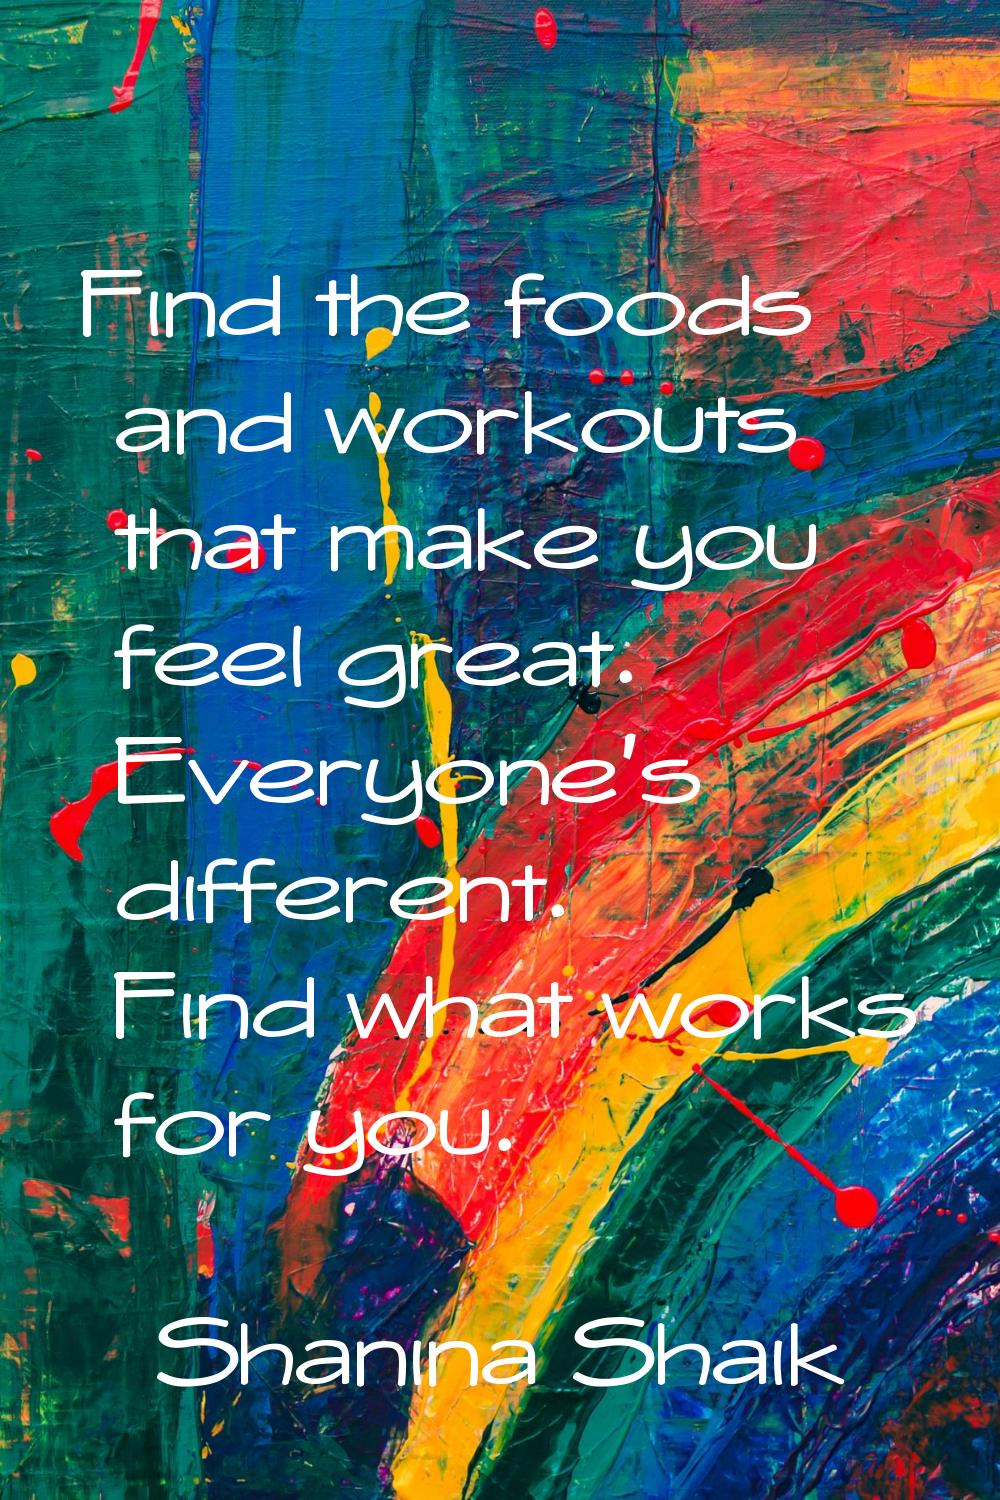 Find the foods and workouts that make you feel great. Everyone's different. Find what works for you